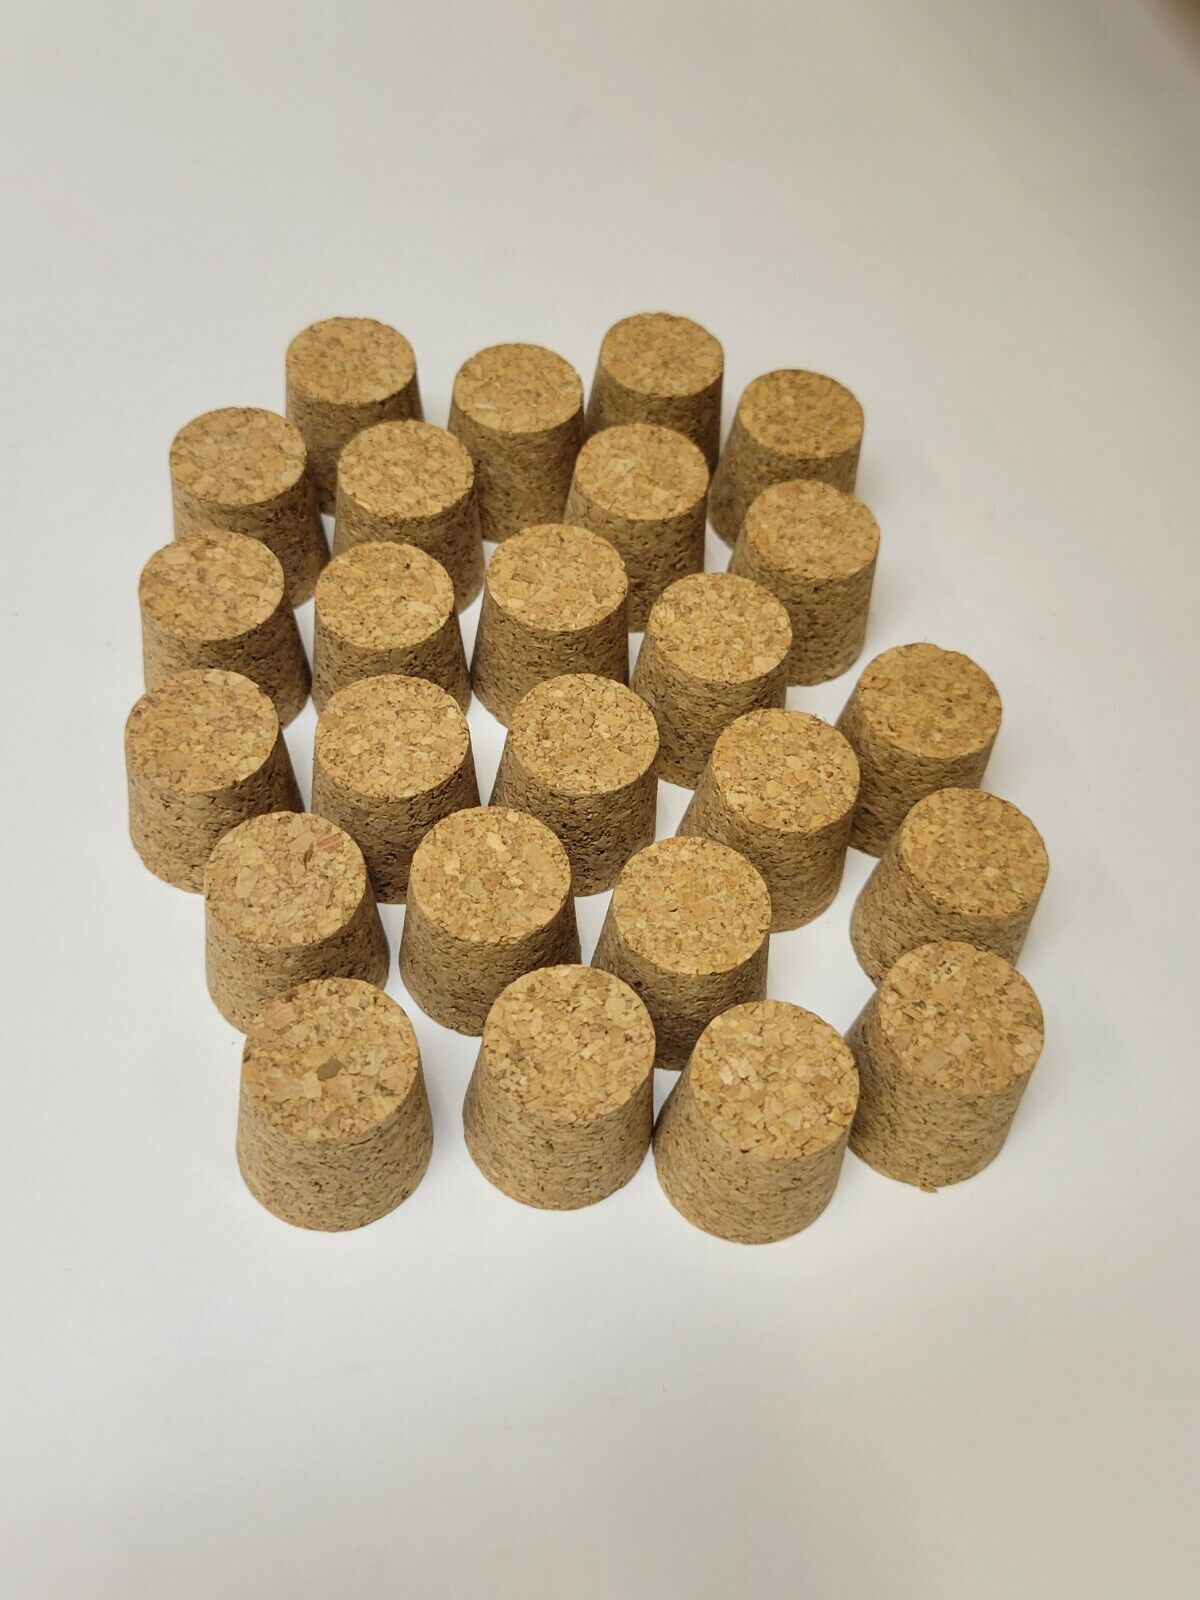 25pc bottle Max 82% OFF Japan Maker New cork stoppers tapered 8